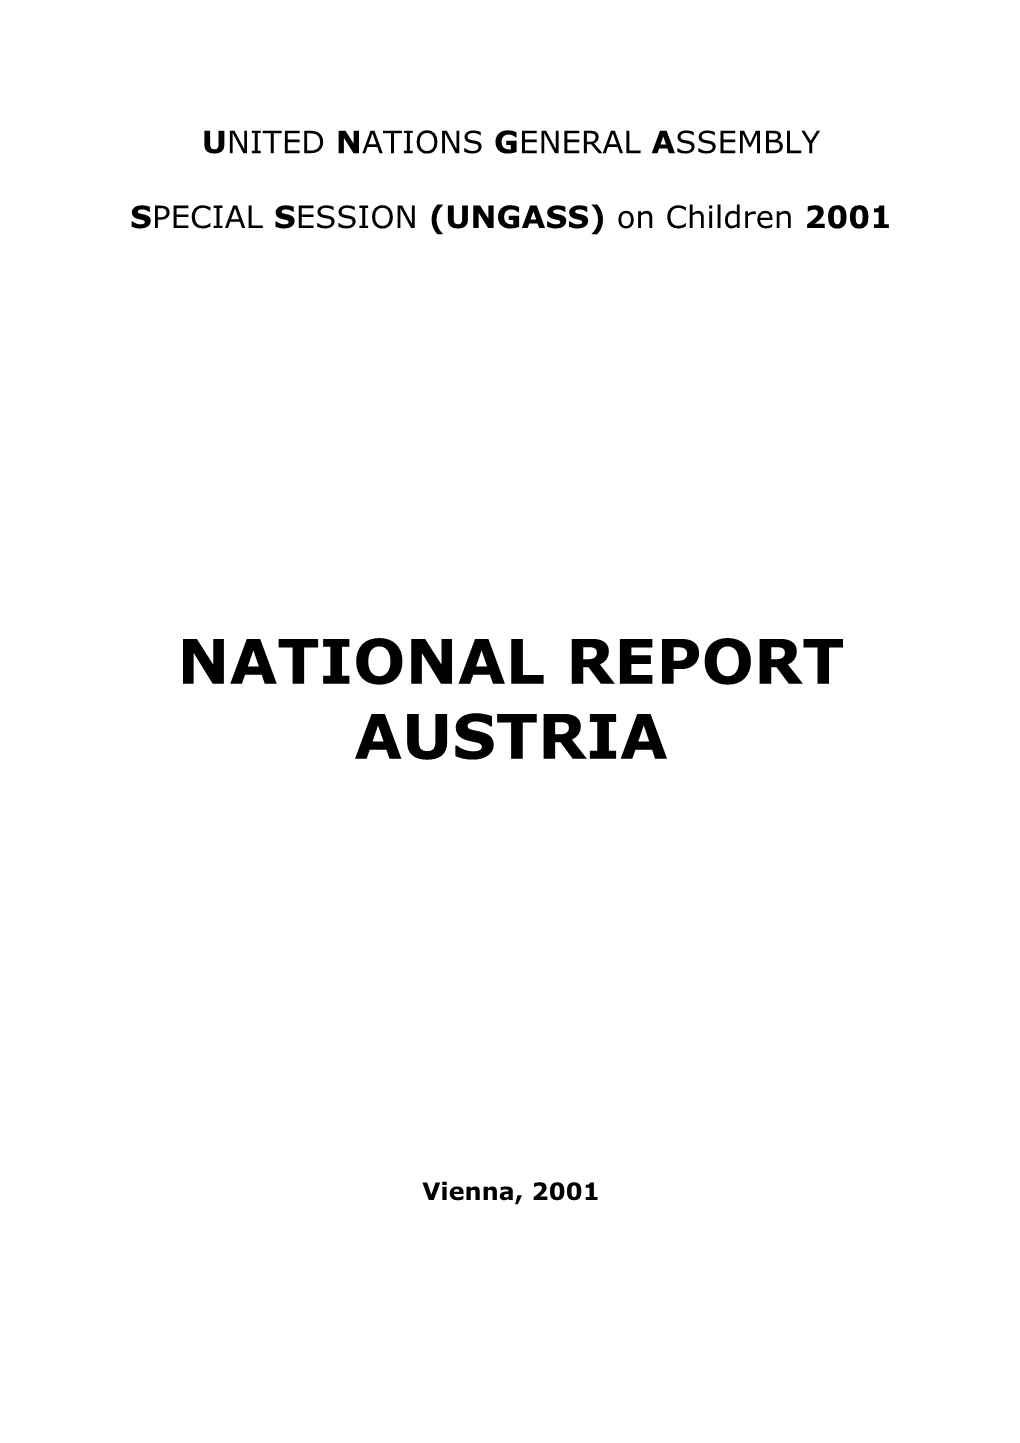 Permanent Mission Of Austria To The United Nations